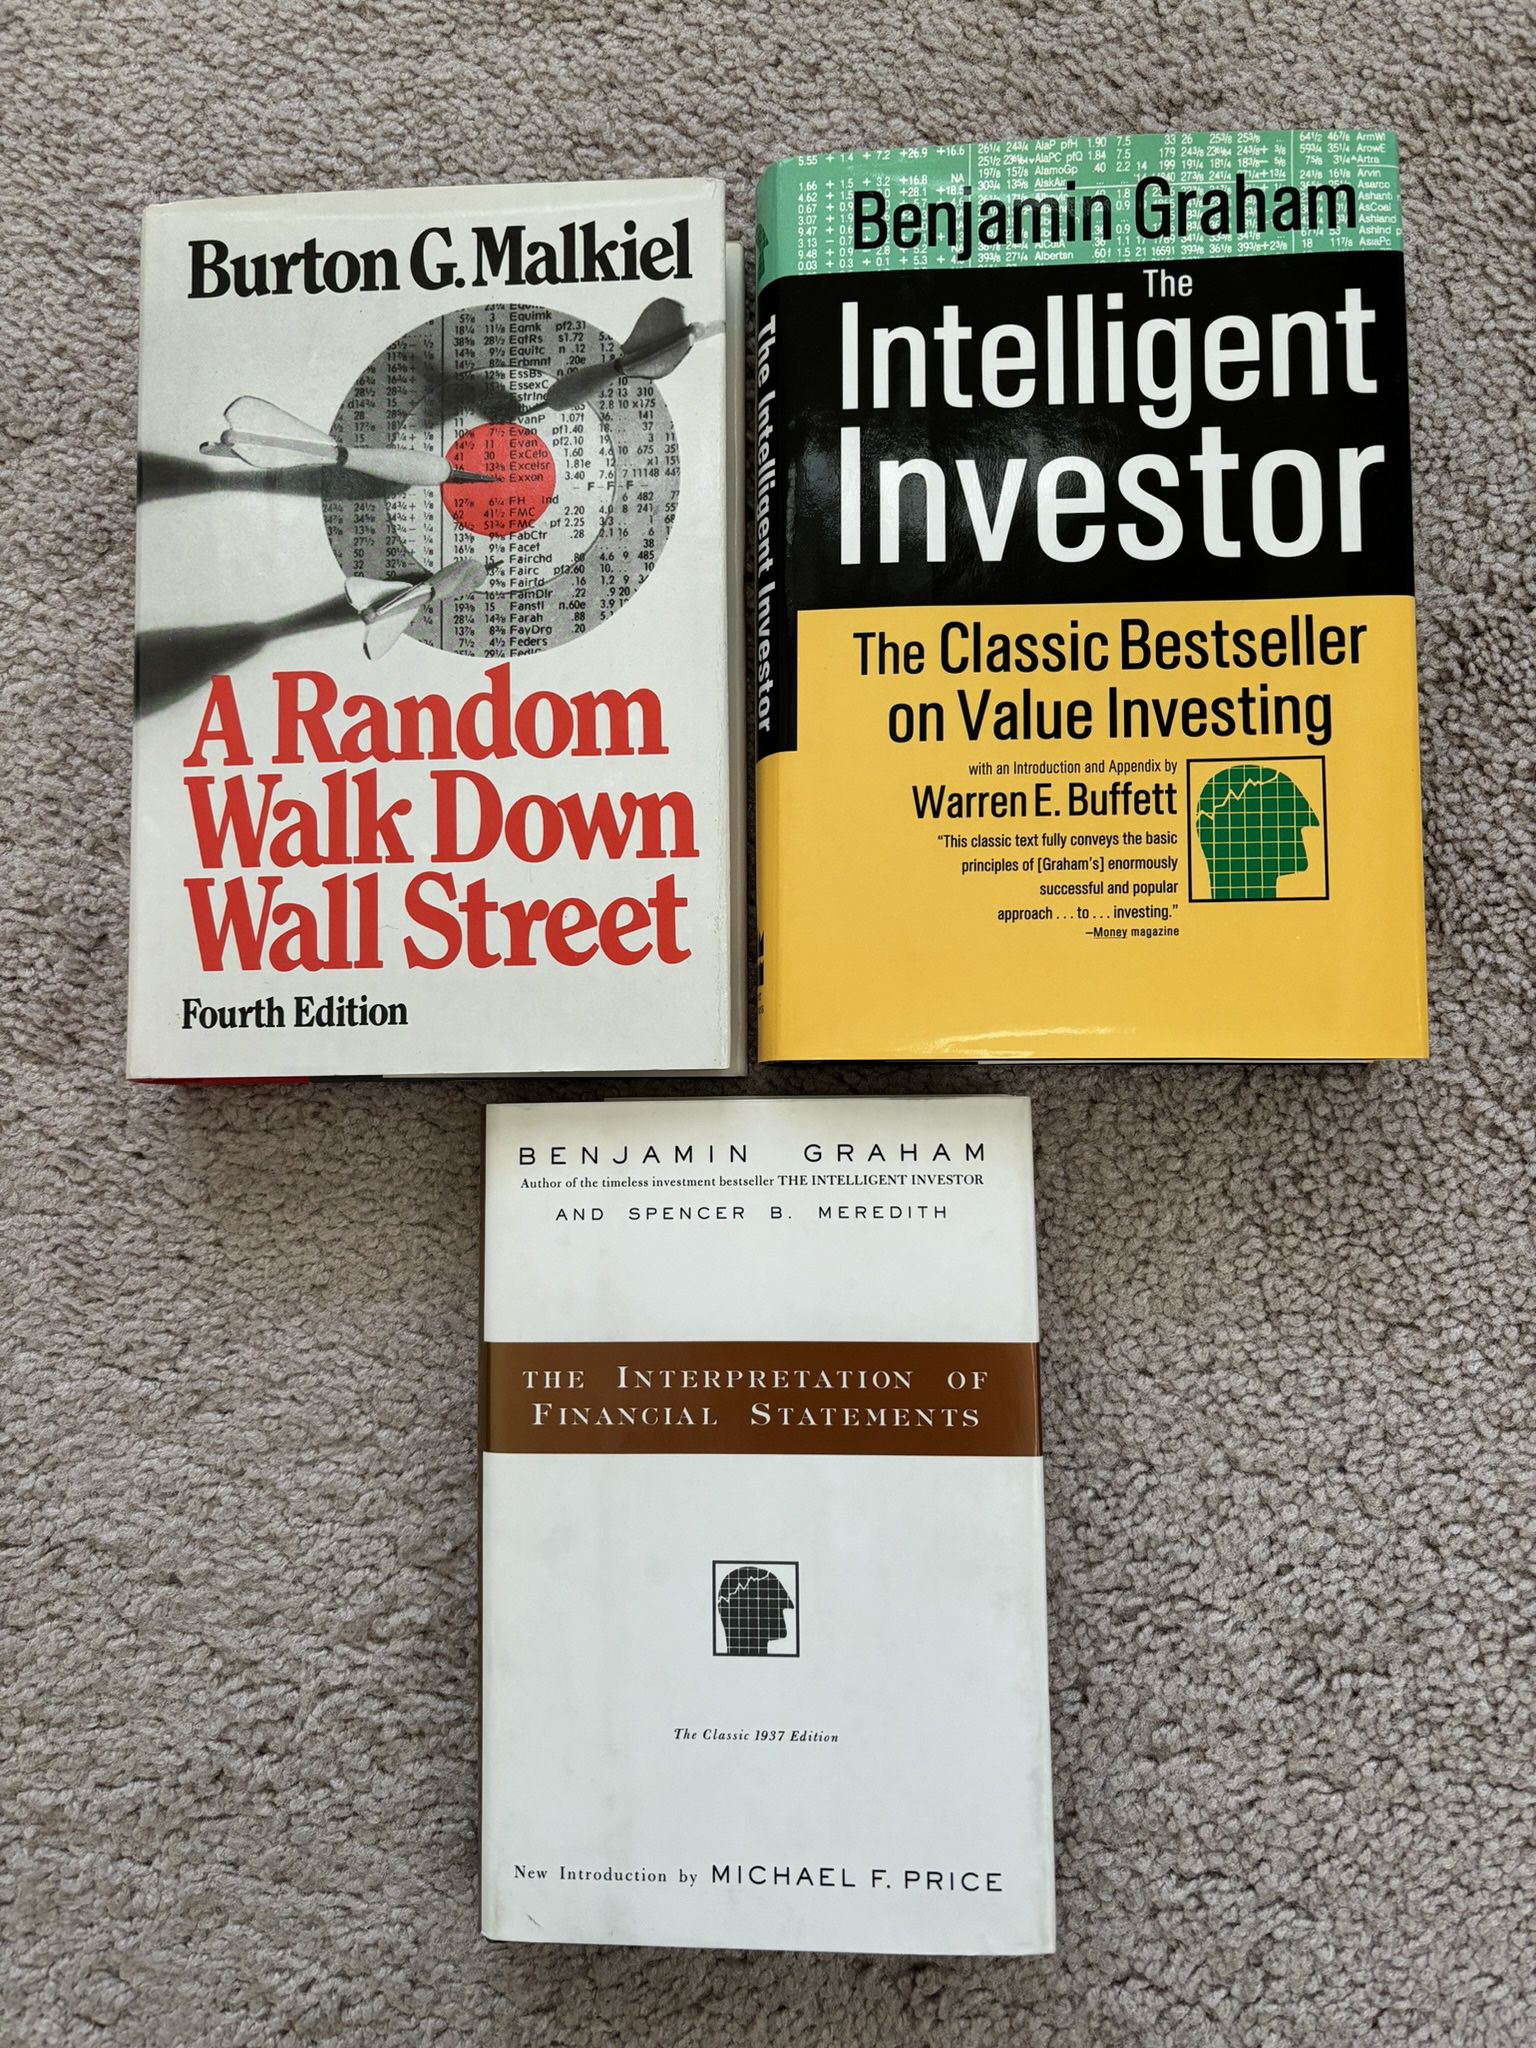 Classic Investment Books.  Lot of 3, new condition.  Essential reading from the bestsellers, The Intelligent Investor by Benjamin Graham (Fourth Editi